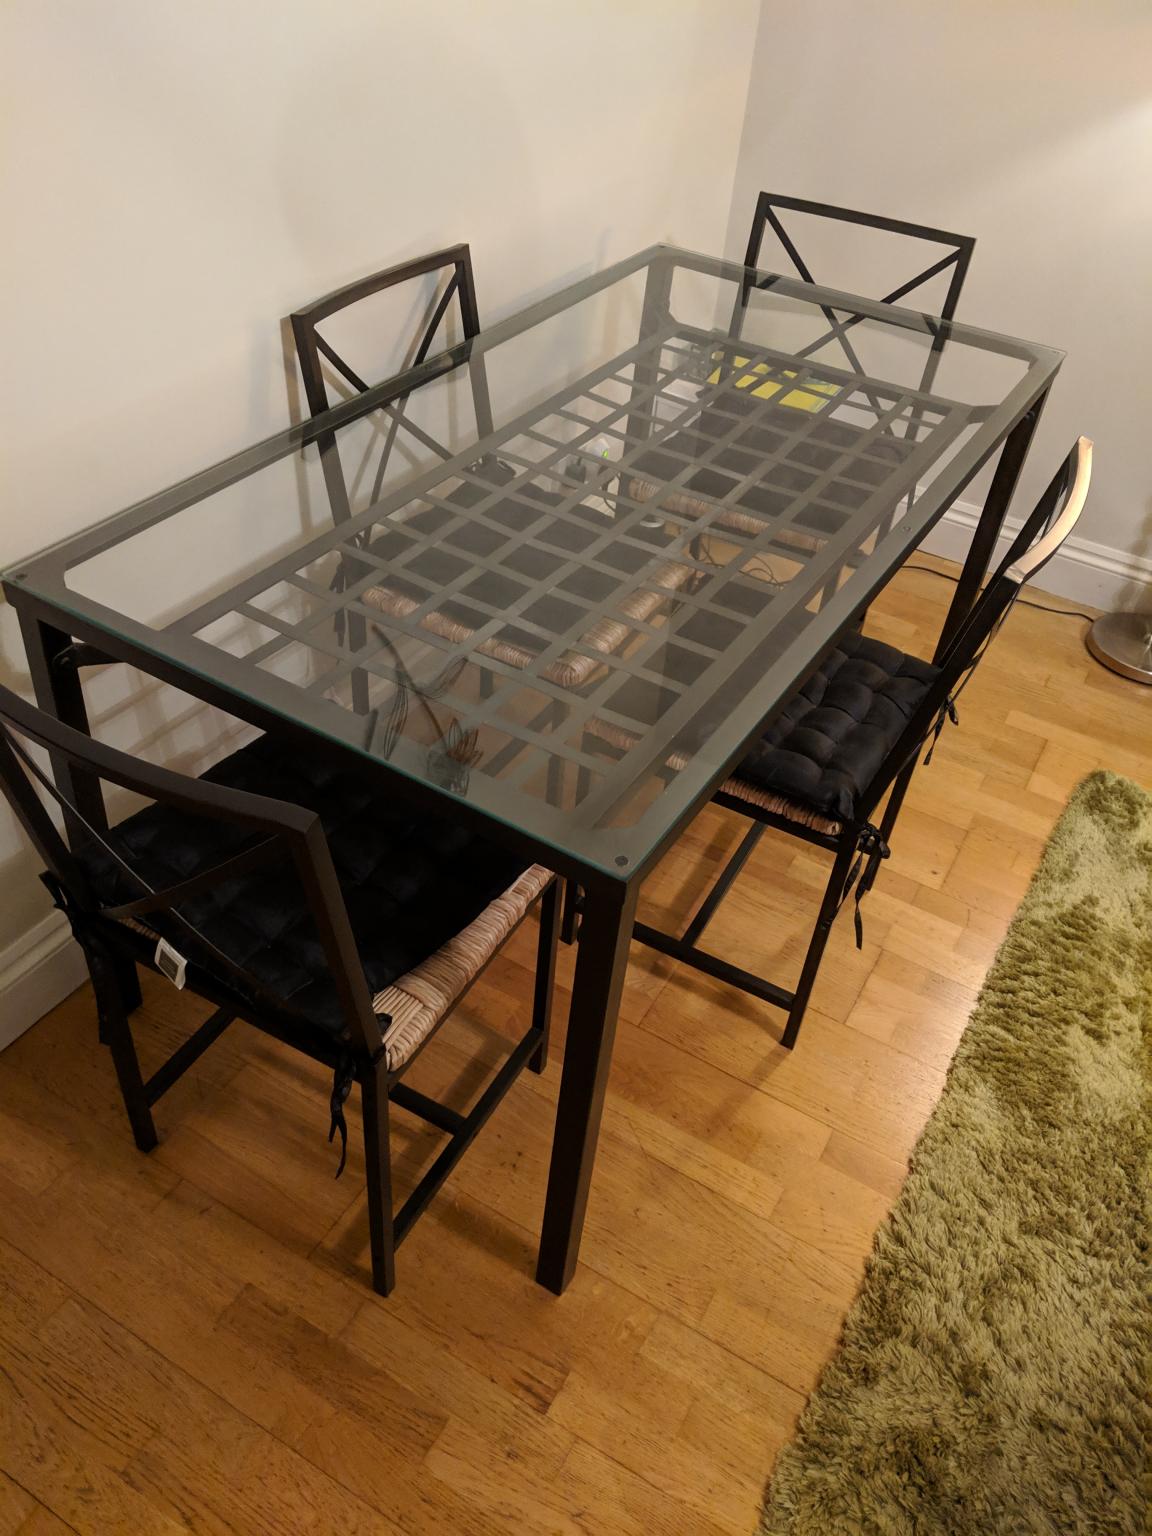 Ikea Granas Glass Dining Table with 4 Chairs in Hertsmere for £80.00